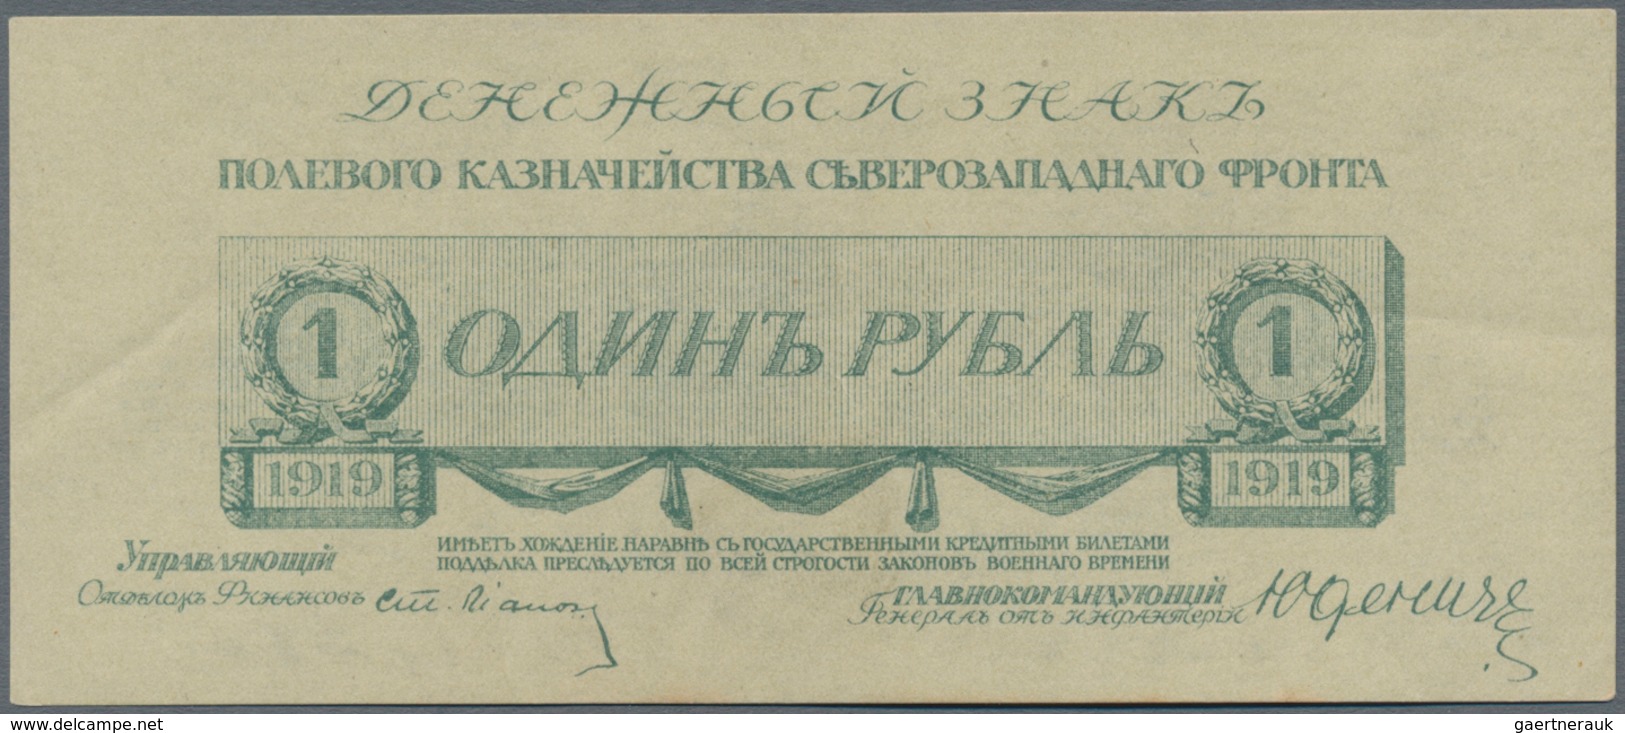 Russia / Russland: Northwest Russia, set with 10 banknotes 25, 50 Kopeks, 1, 3, 5, 10, 25, 100, 500